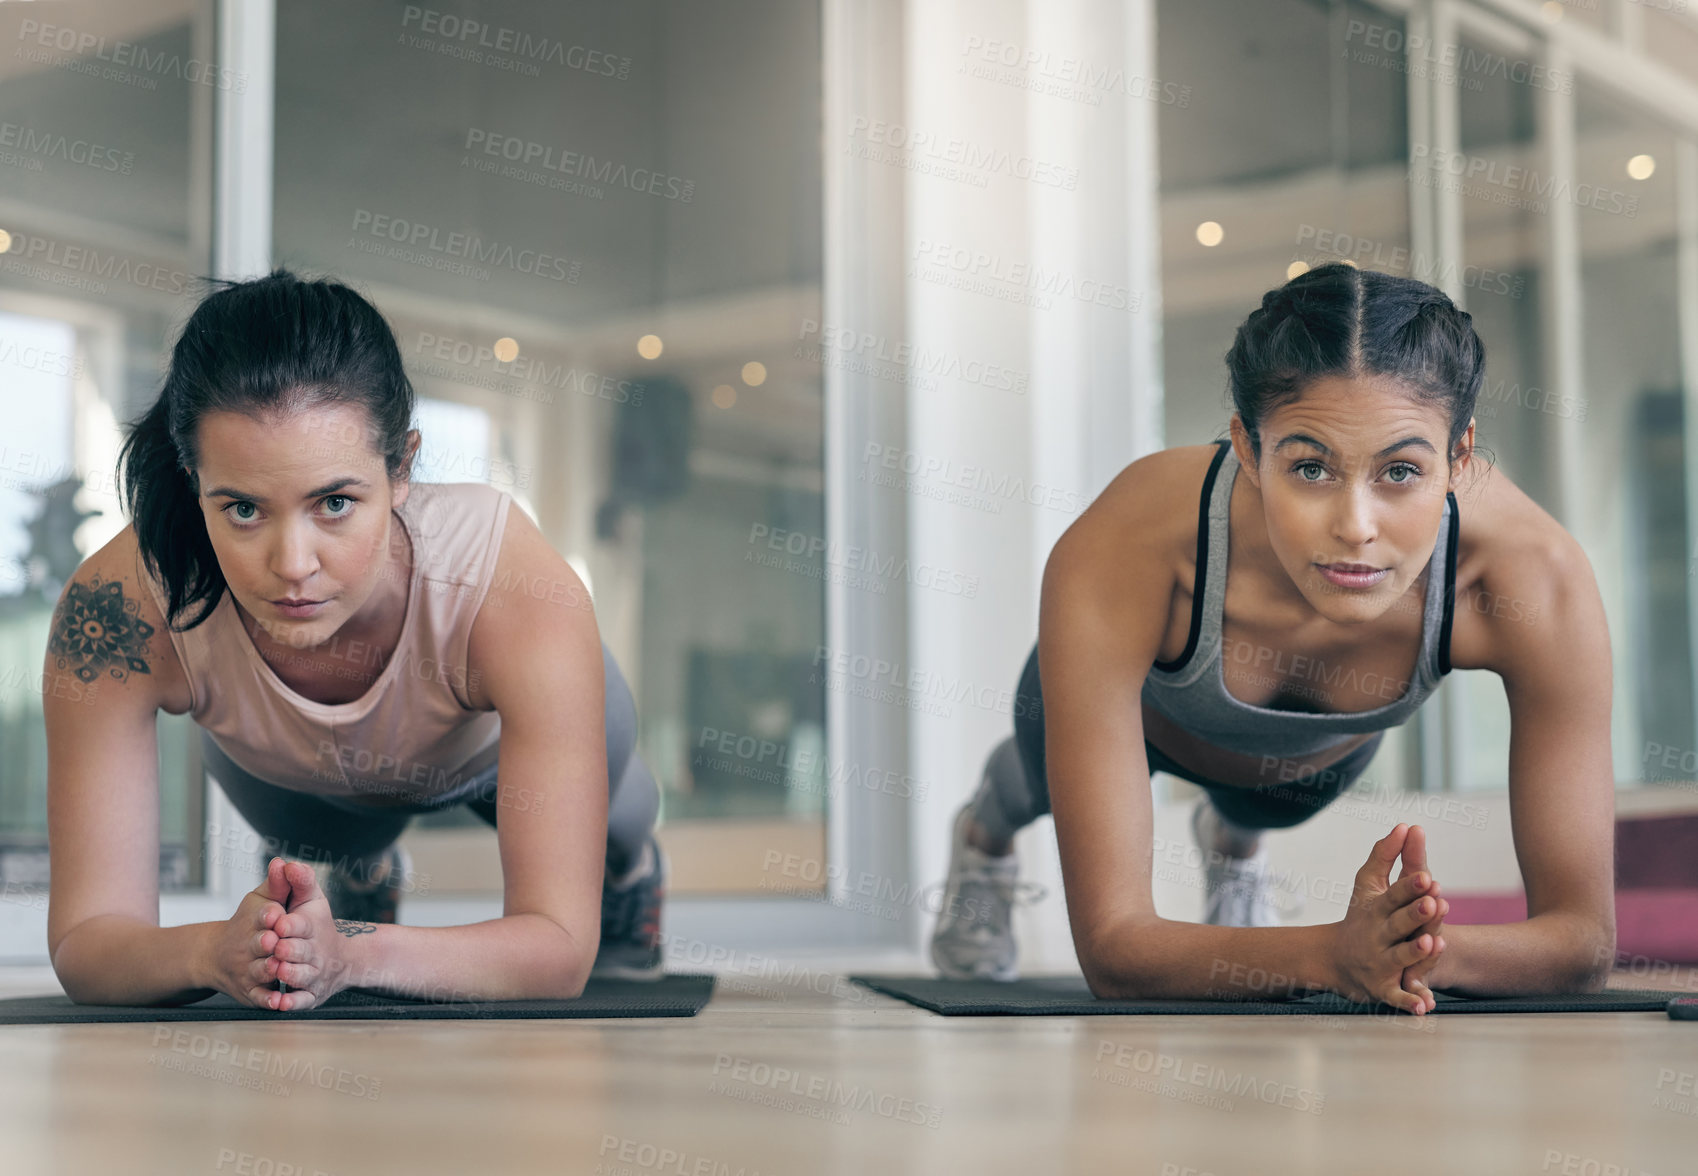 Buy stock photo Shot of two young athletes working out together at the gym